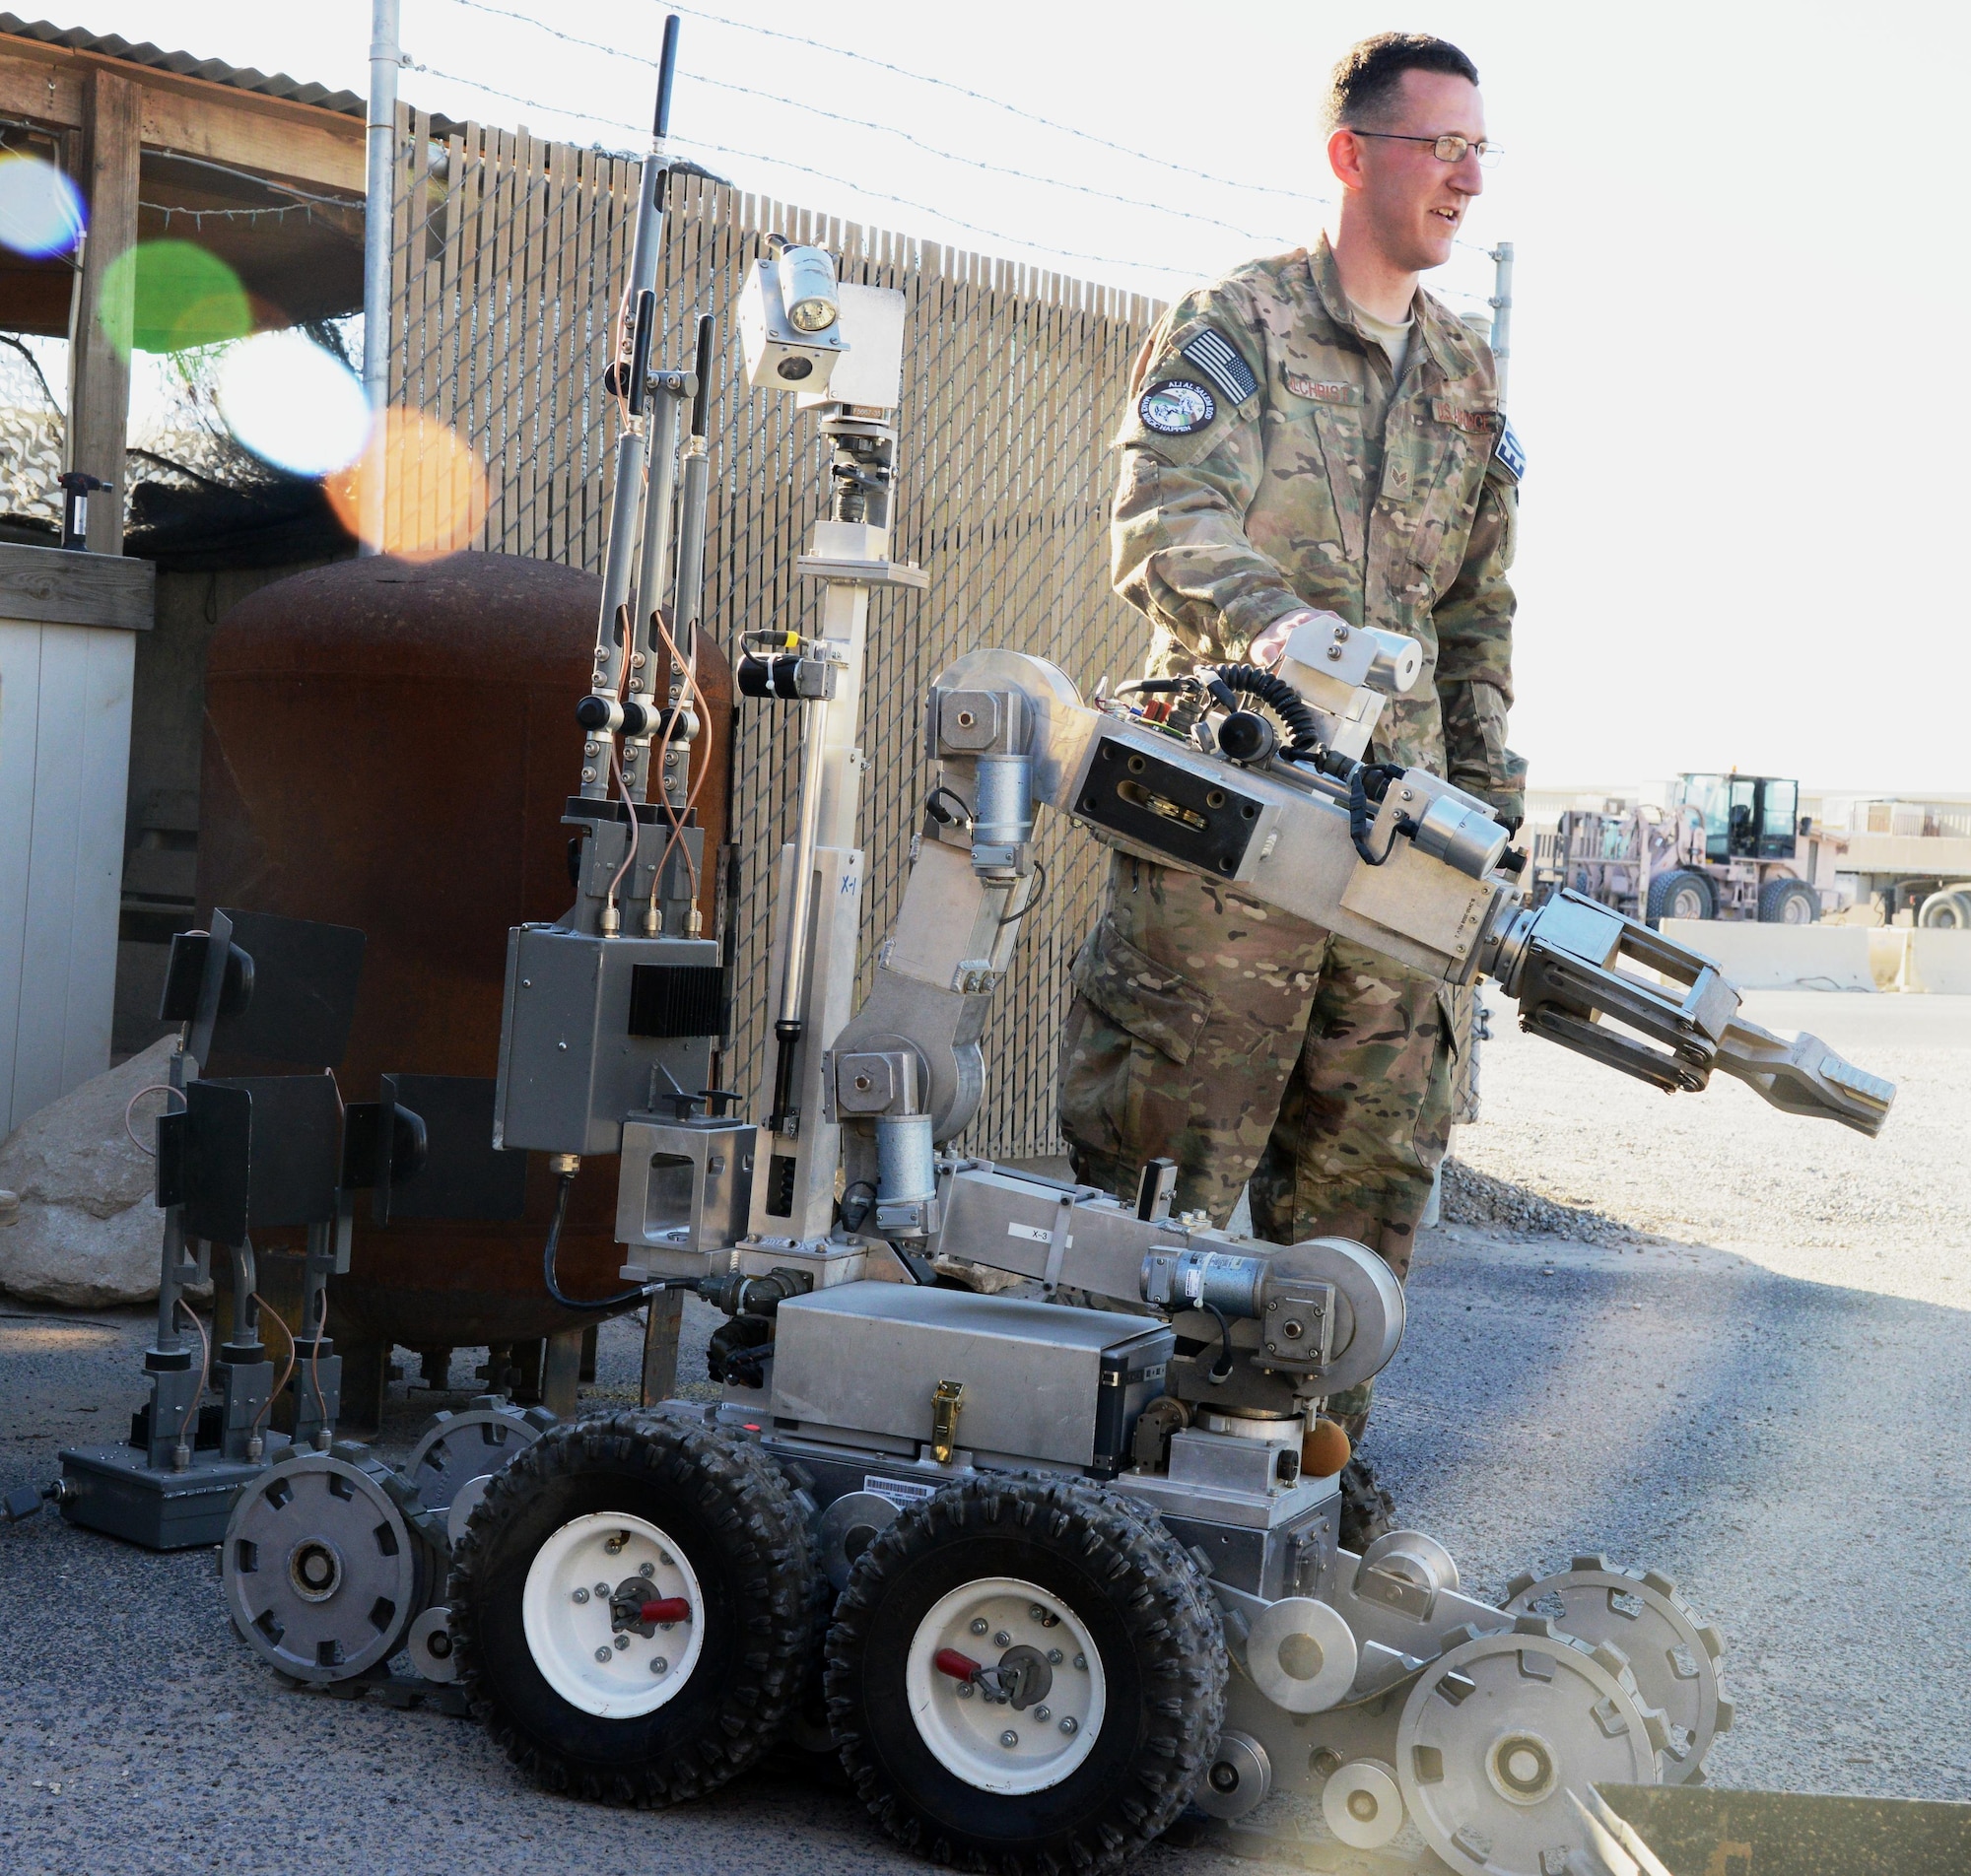 Senior Airmen Matthew Gilchrist, 386th Expeditionary Civil Engineer Squadron Explosive Ordnance Disposal technician, explains the capability and use of robots at an undisclosed location in Southwest Asia March 6, 2015.  EOD Airmen are responsible for locating and neutralizing potential explosive devices and often use robots to accomplish this from a safer distance. (U.S. Air Force photo by 1st Lt. Sarah Ruckriegle)